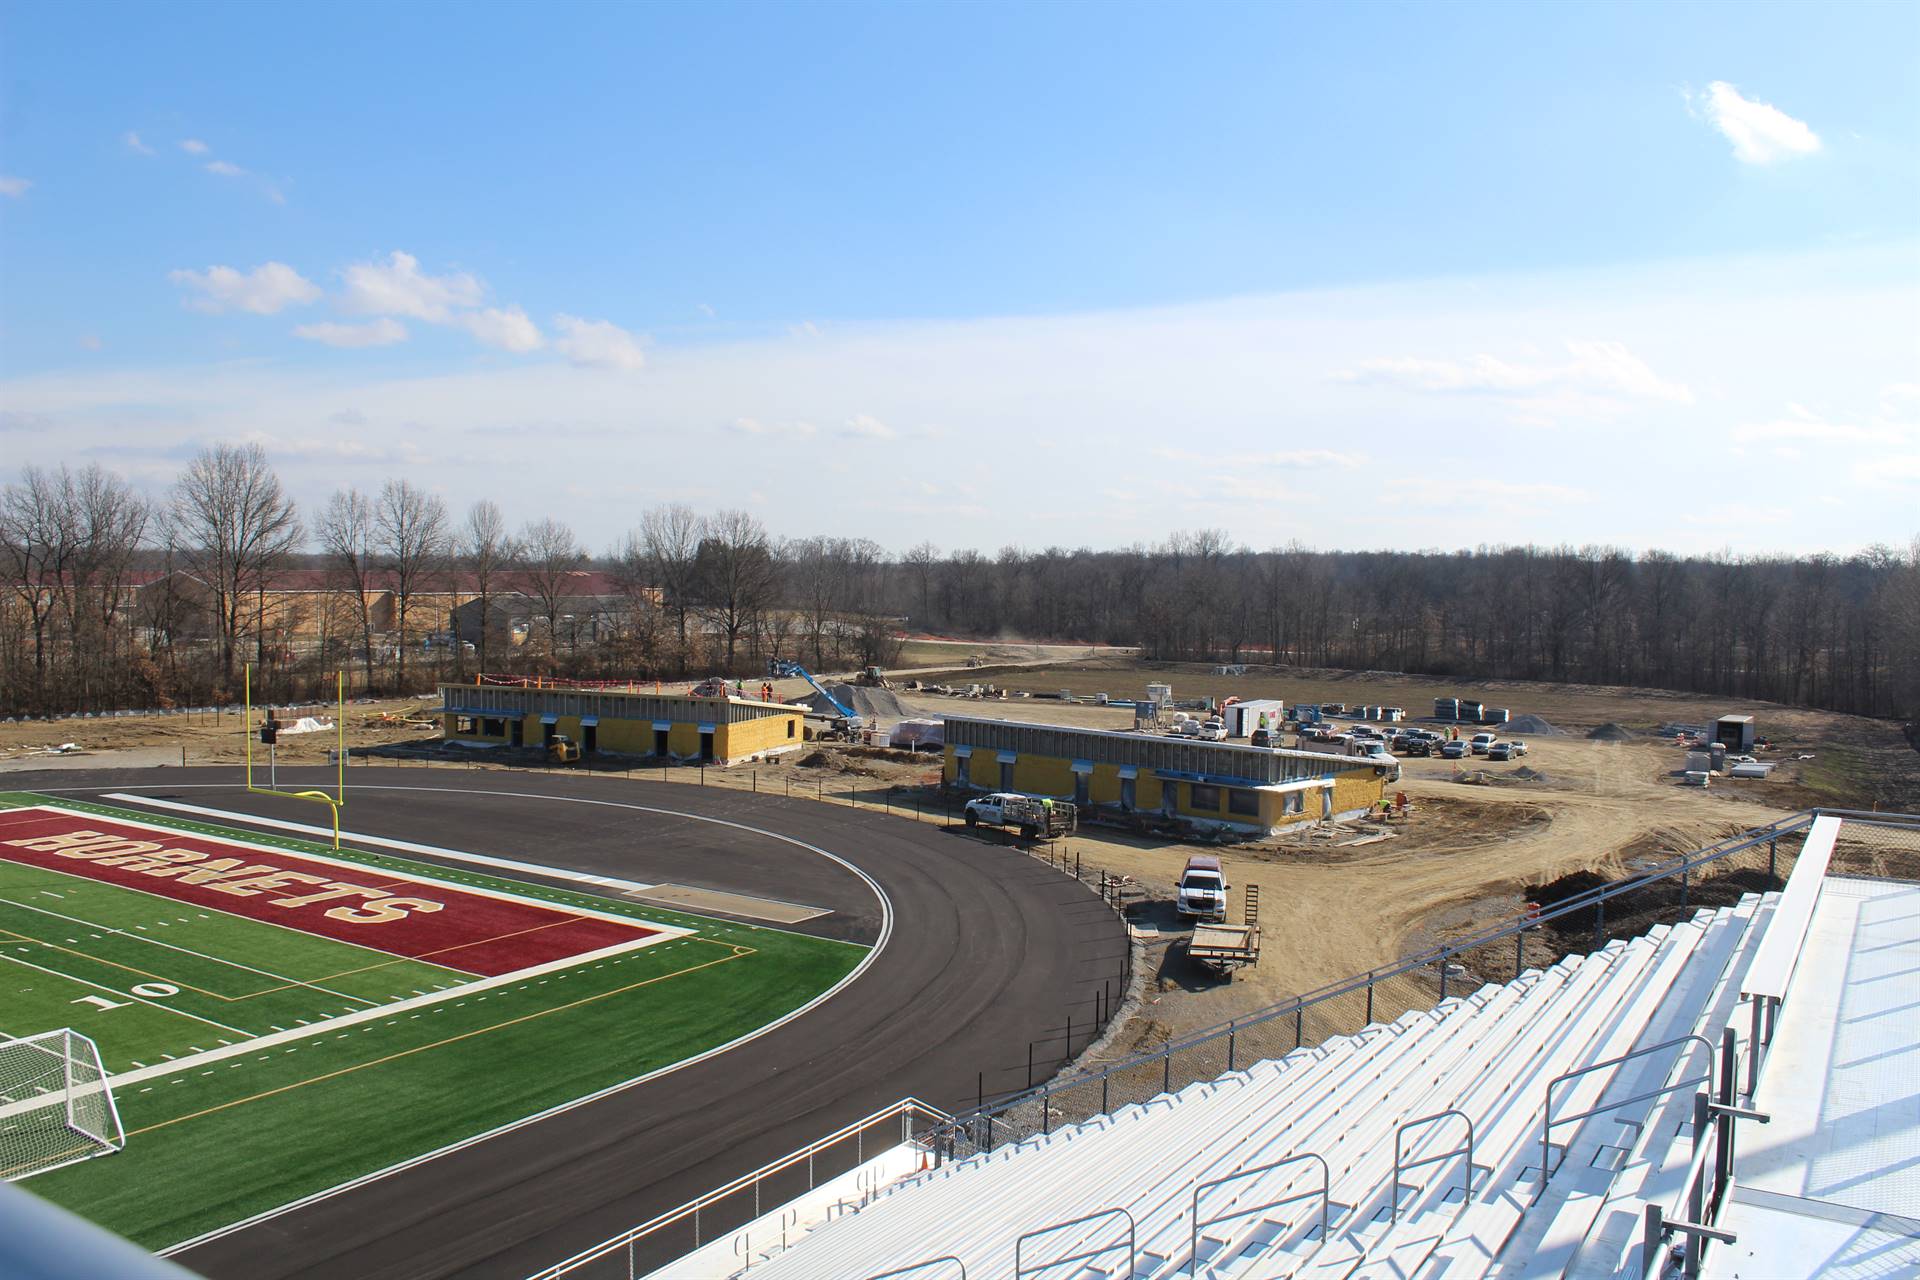 Constriction of the athletic complex